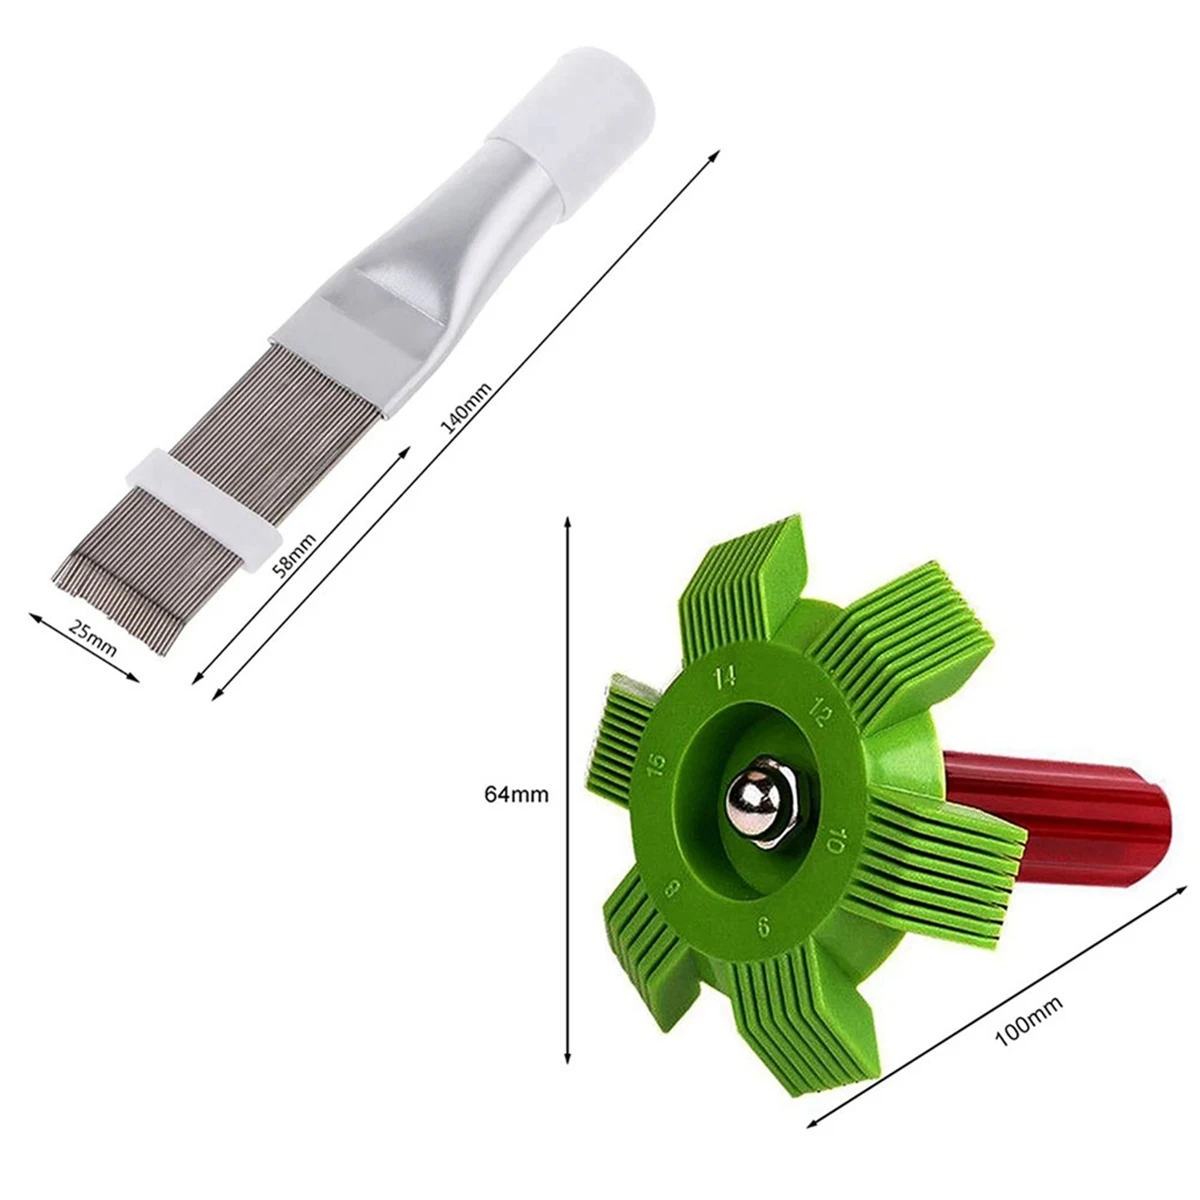 

Condenser Comb Stainless Steel Fin Comb Brush for Air Conditioner Blade Cooling Straightening Cleaning Tool Repair Tools